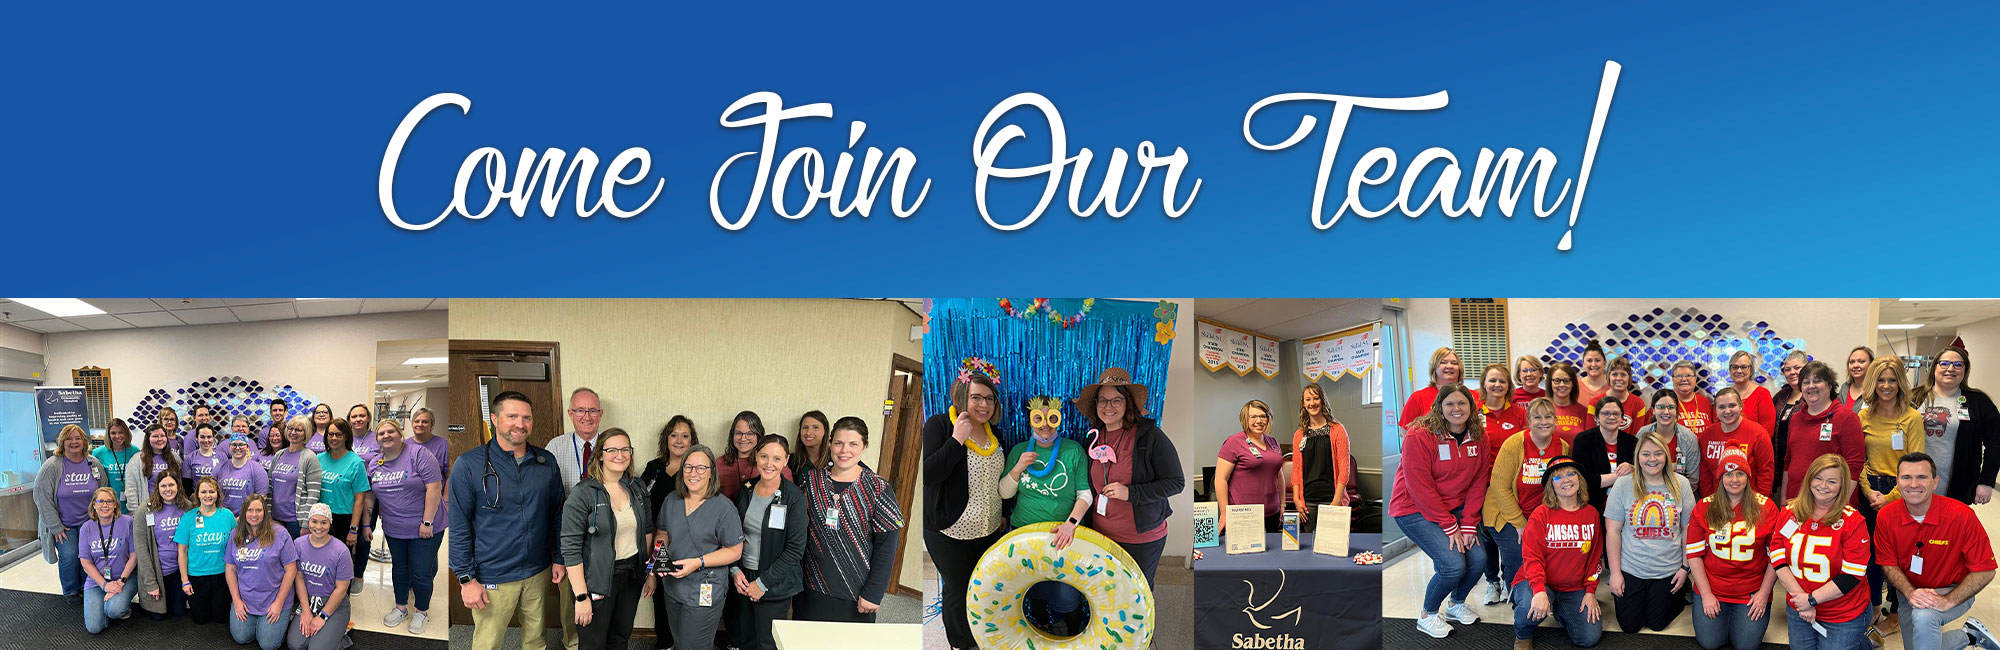 Come join our Team!
Sabetha Community Hospital